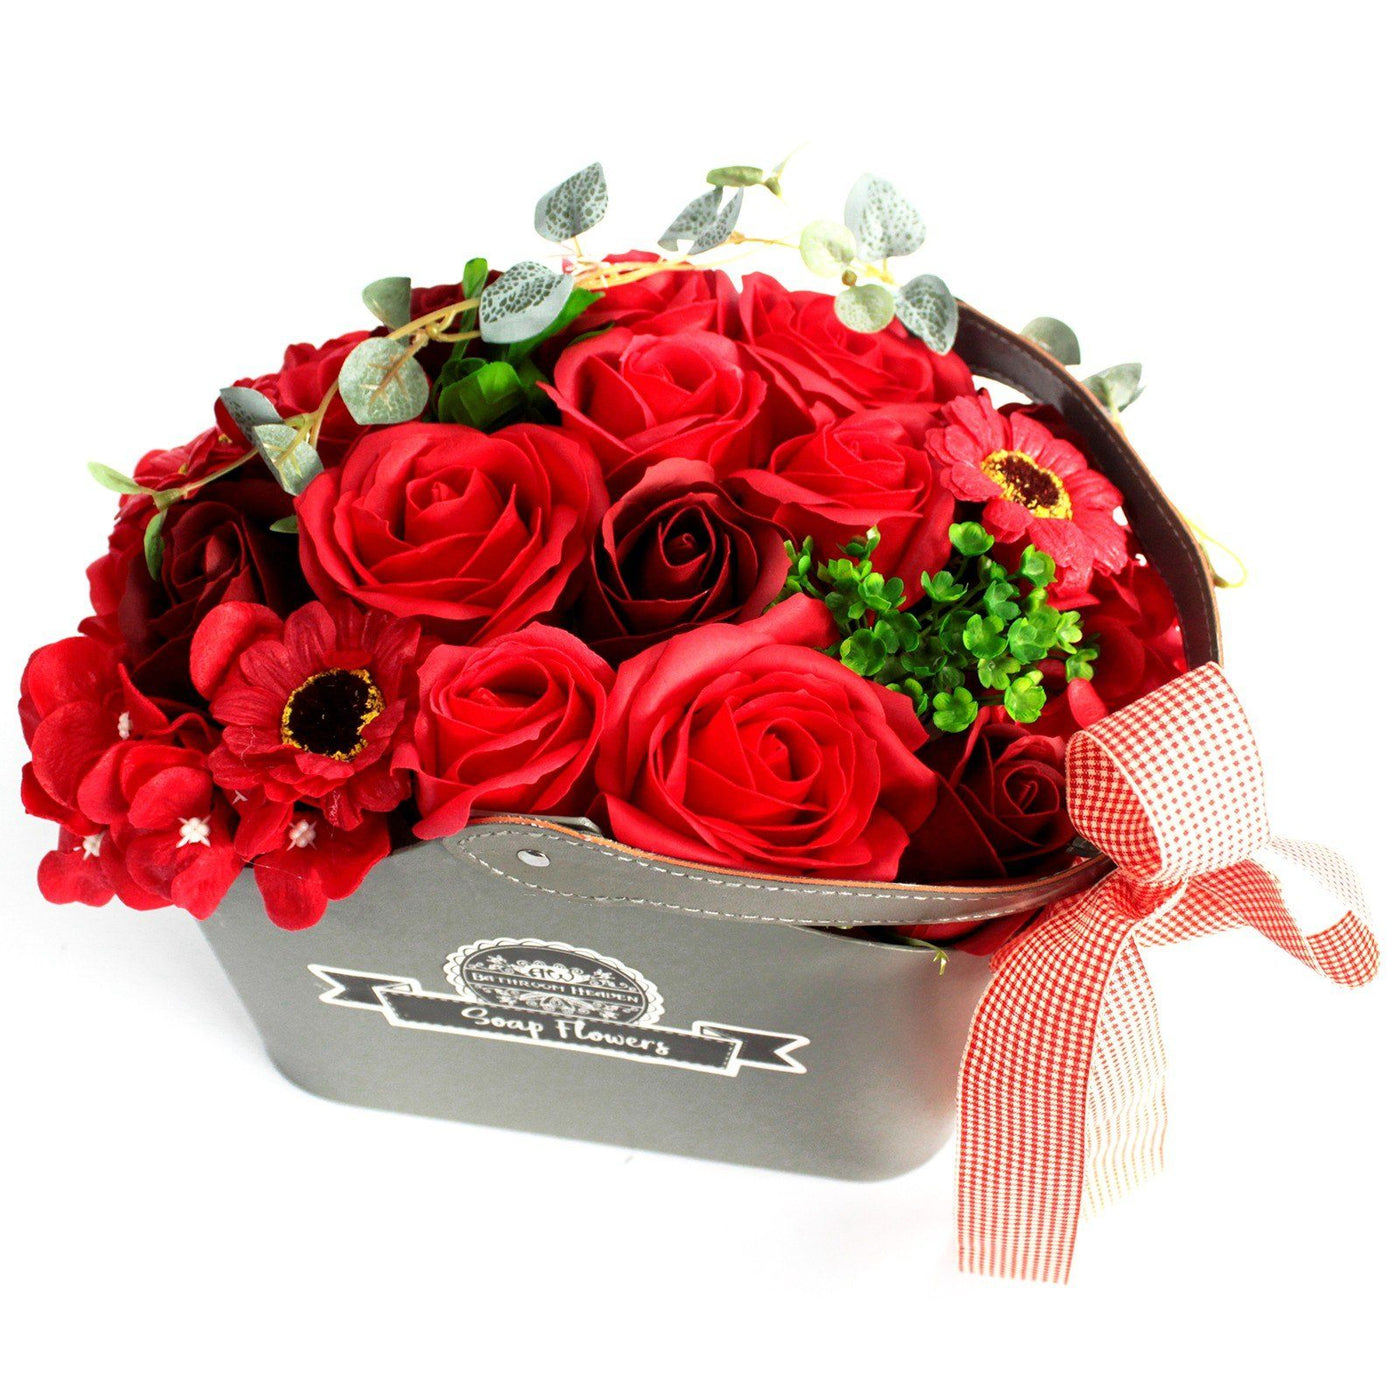  Beautifully Packed In Gift Basket Red Body Soap Flowers, Perfect Wedding Gift, Birthday Gift, Christmas Stocking Filler.